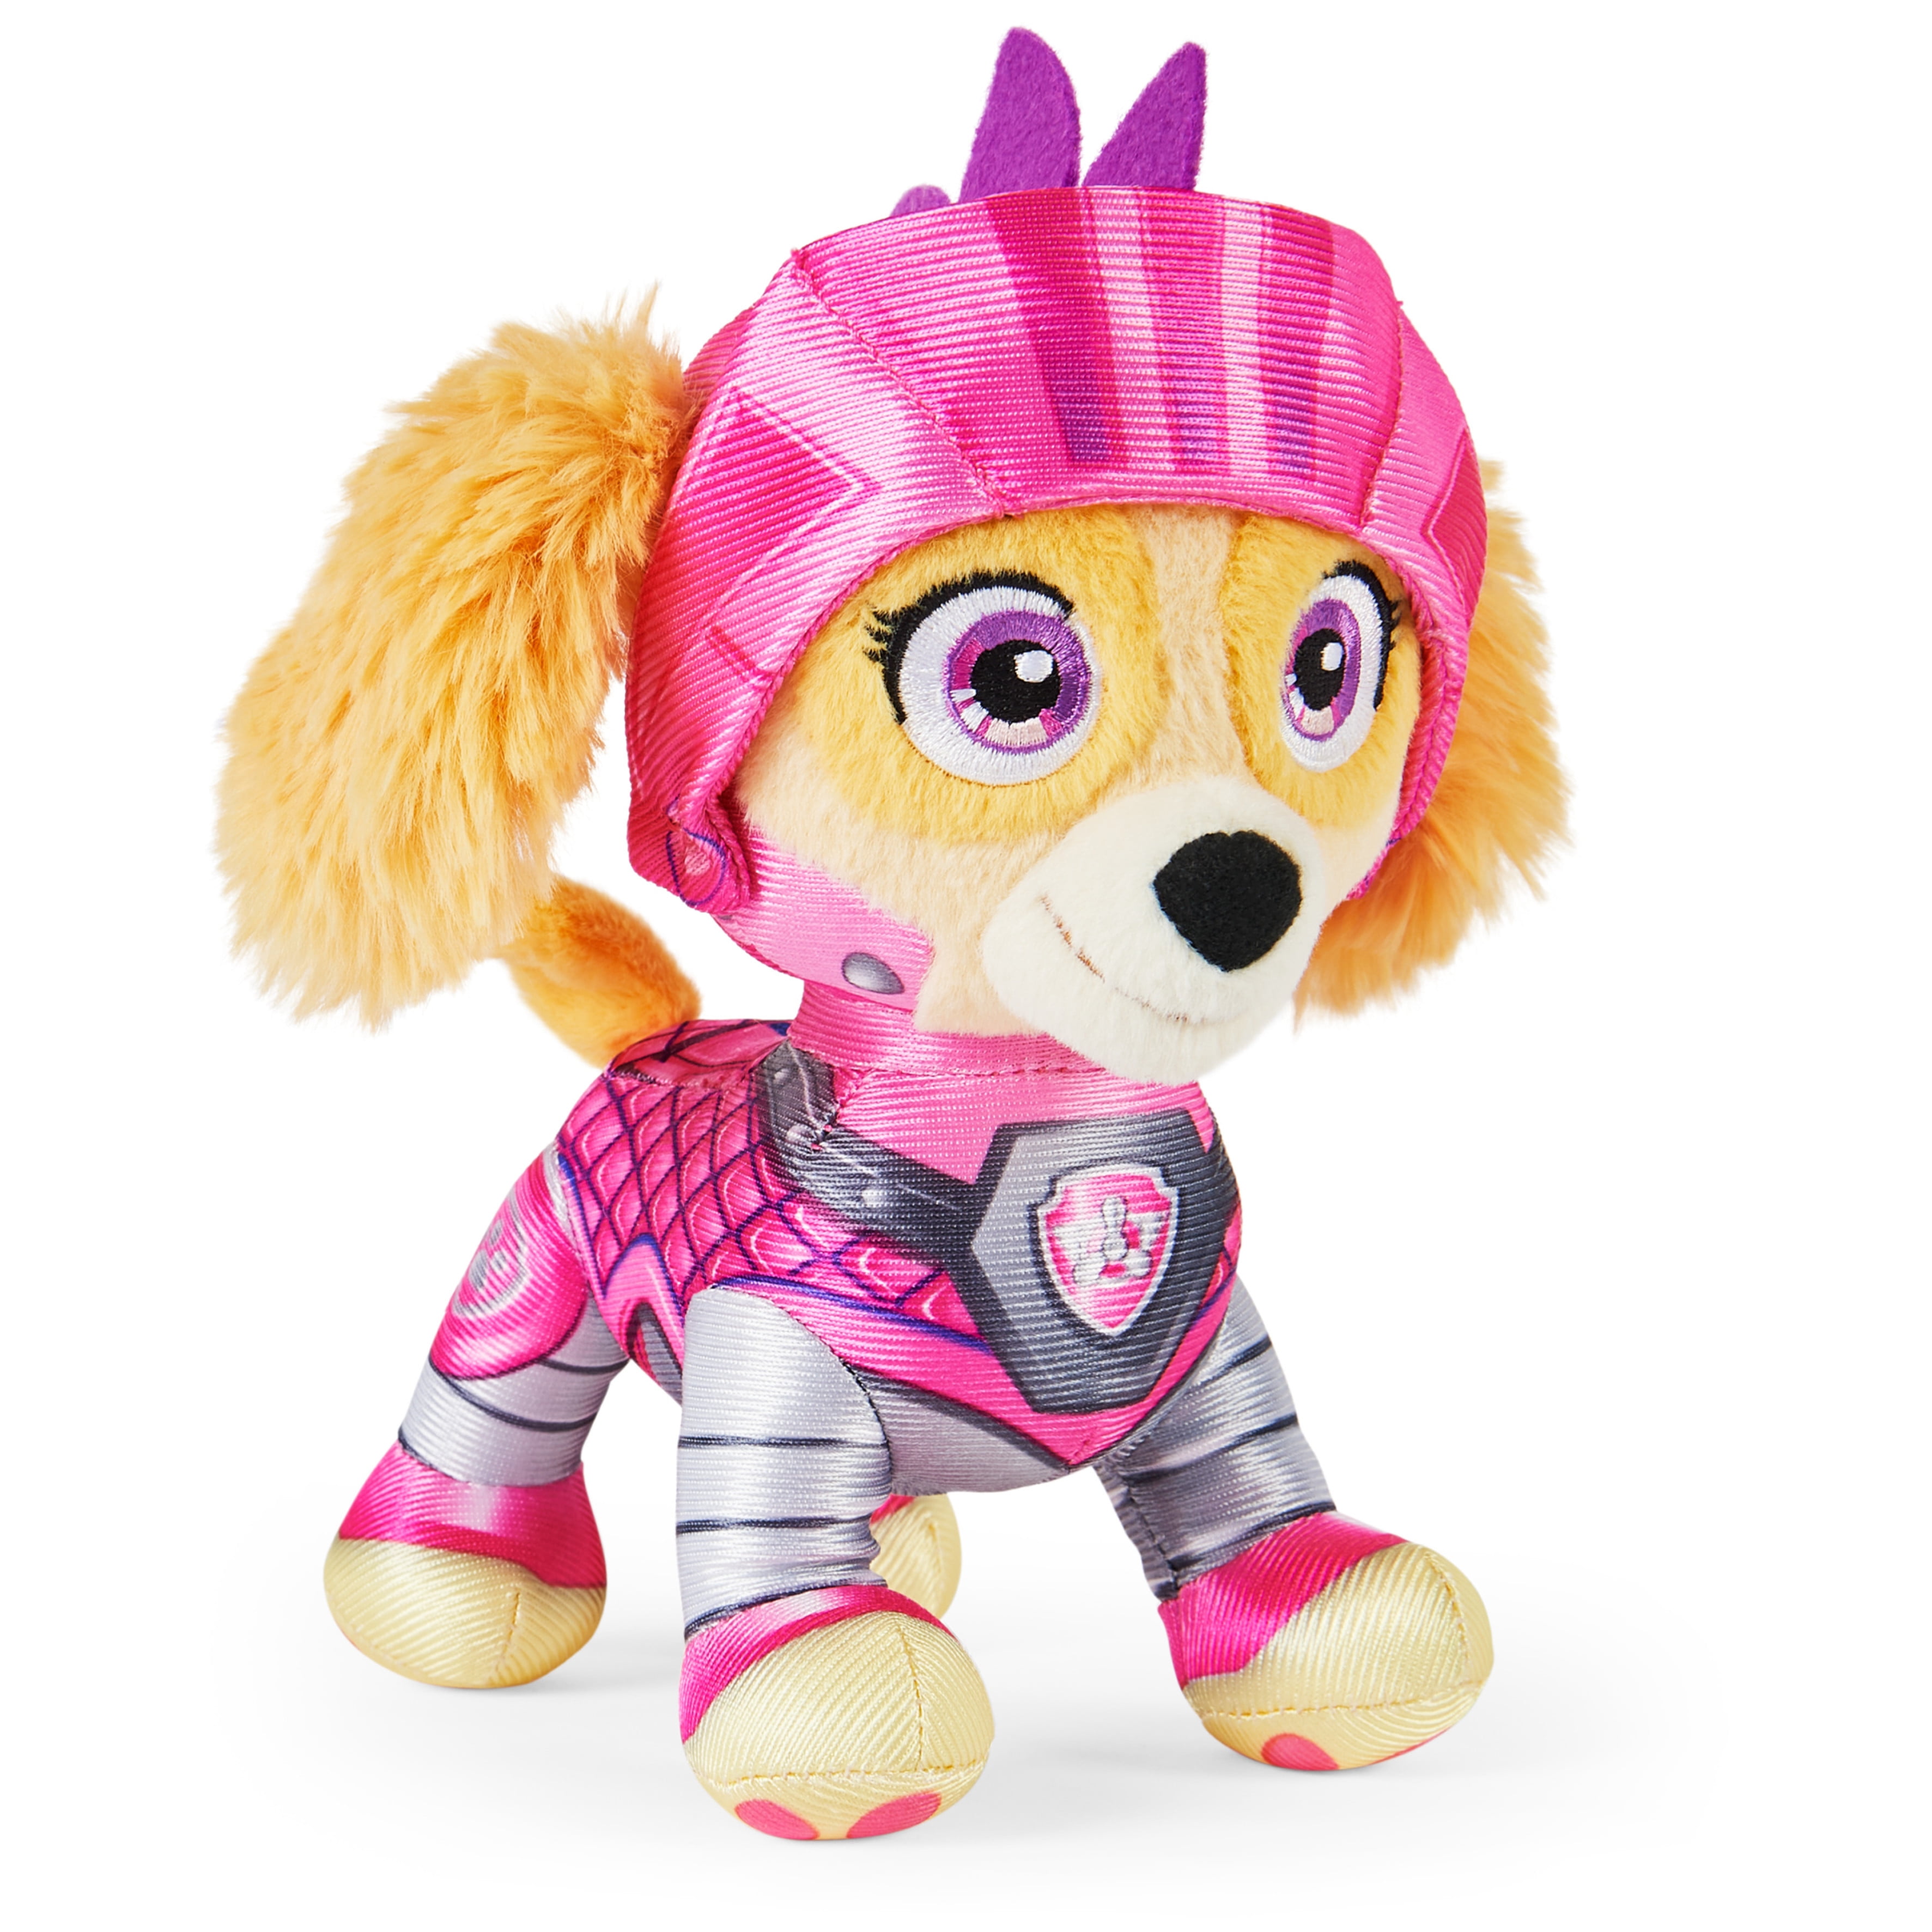 PAW Patrol: Rescue Knights - Skye Plush Toy, 8-Inches Tall 